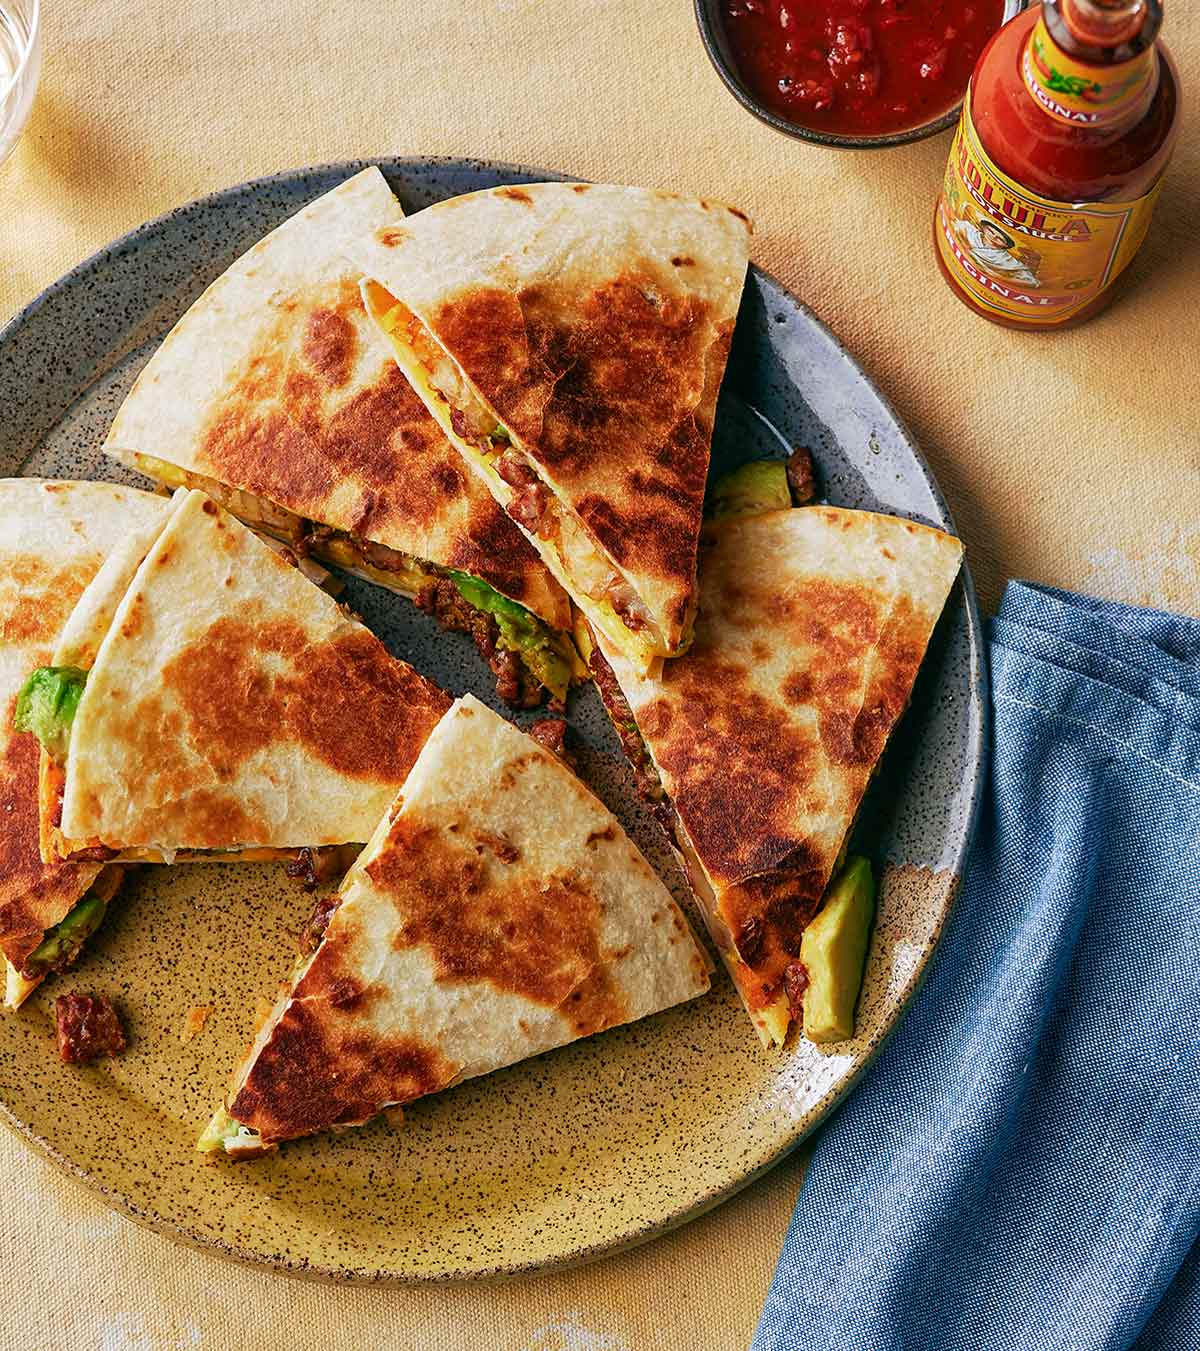 A California breakfast quesadilla, cut into eight wedges on a plate with a bottle of hot sauce on the side.